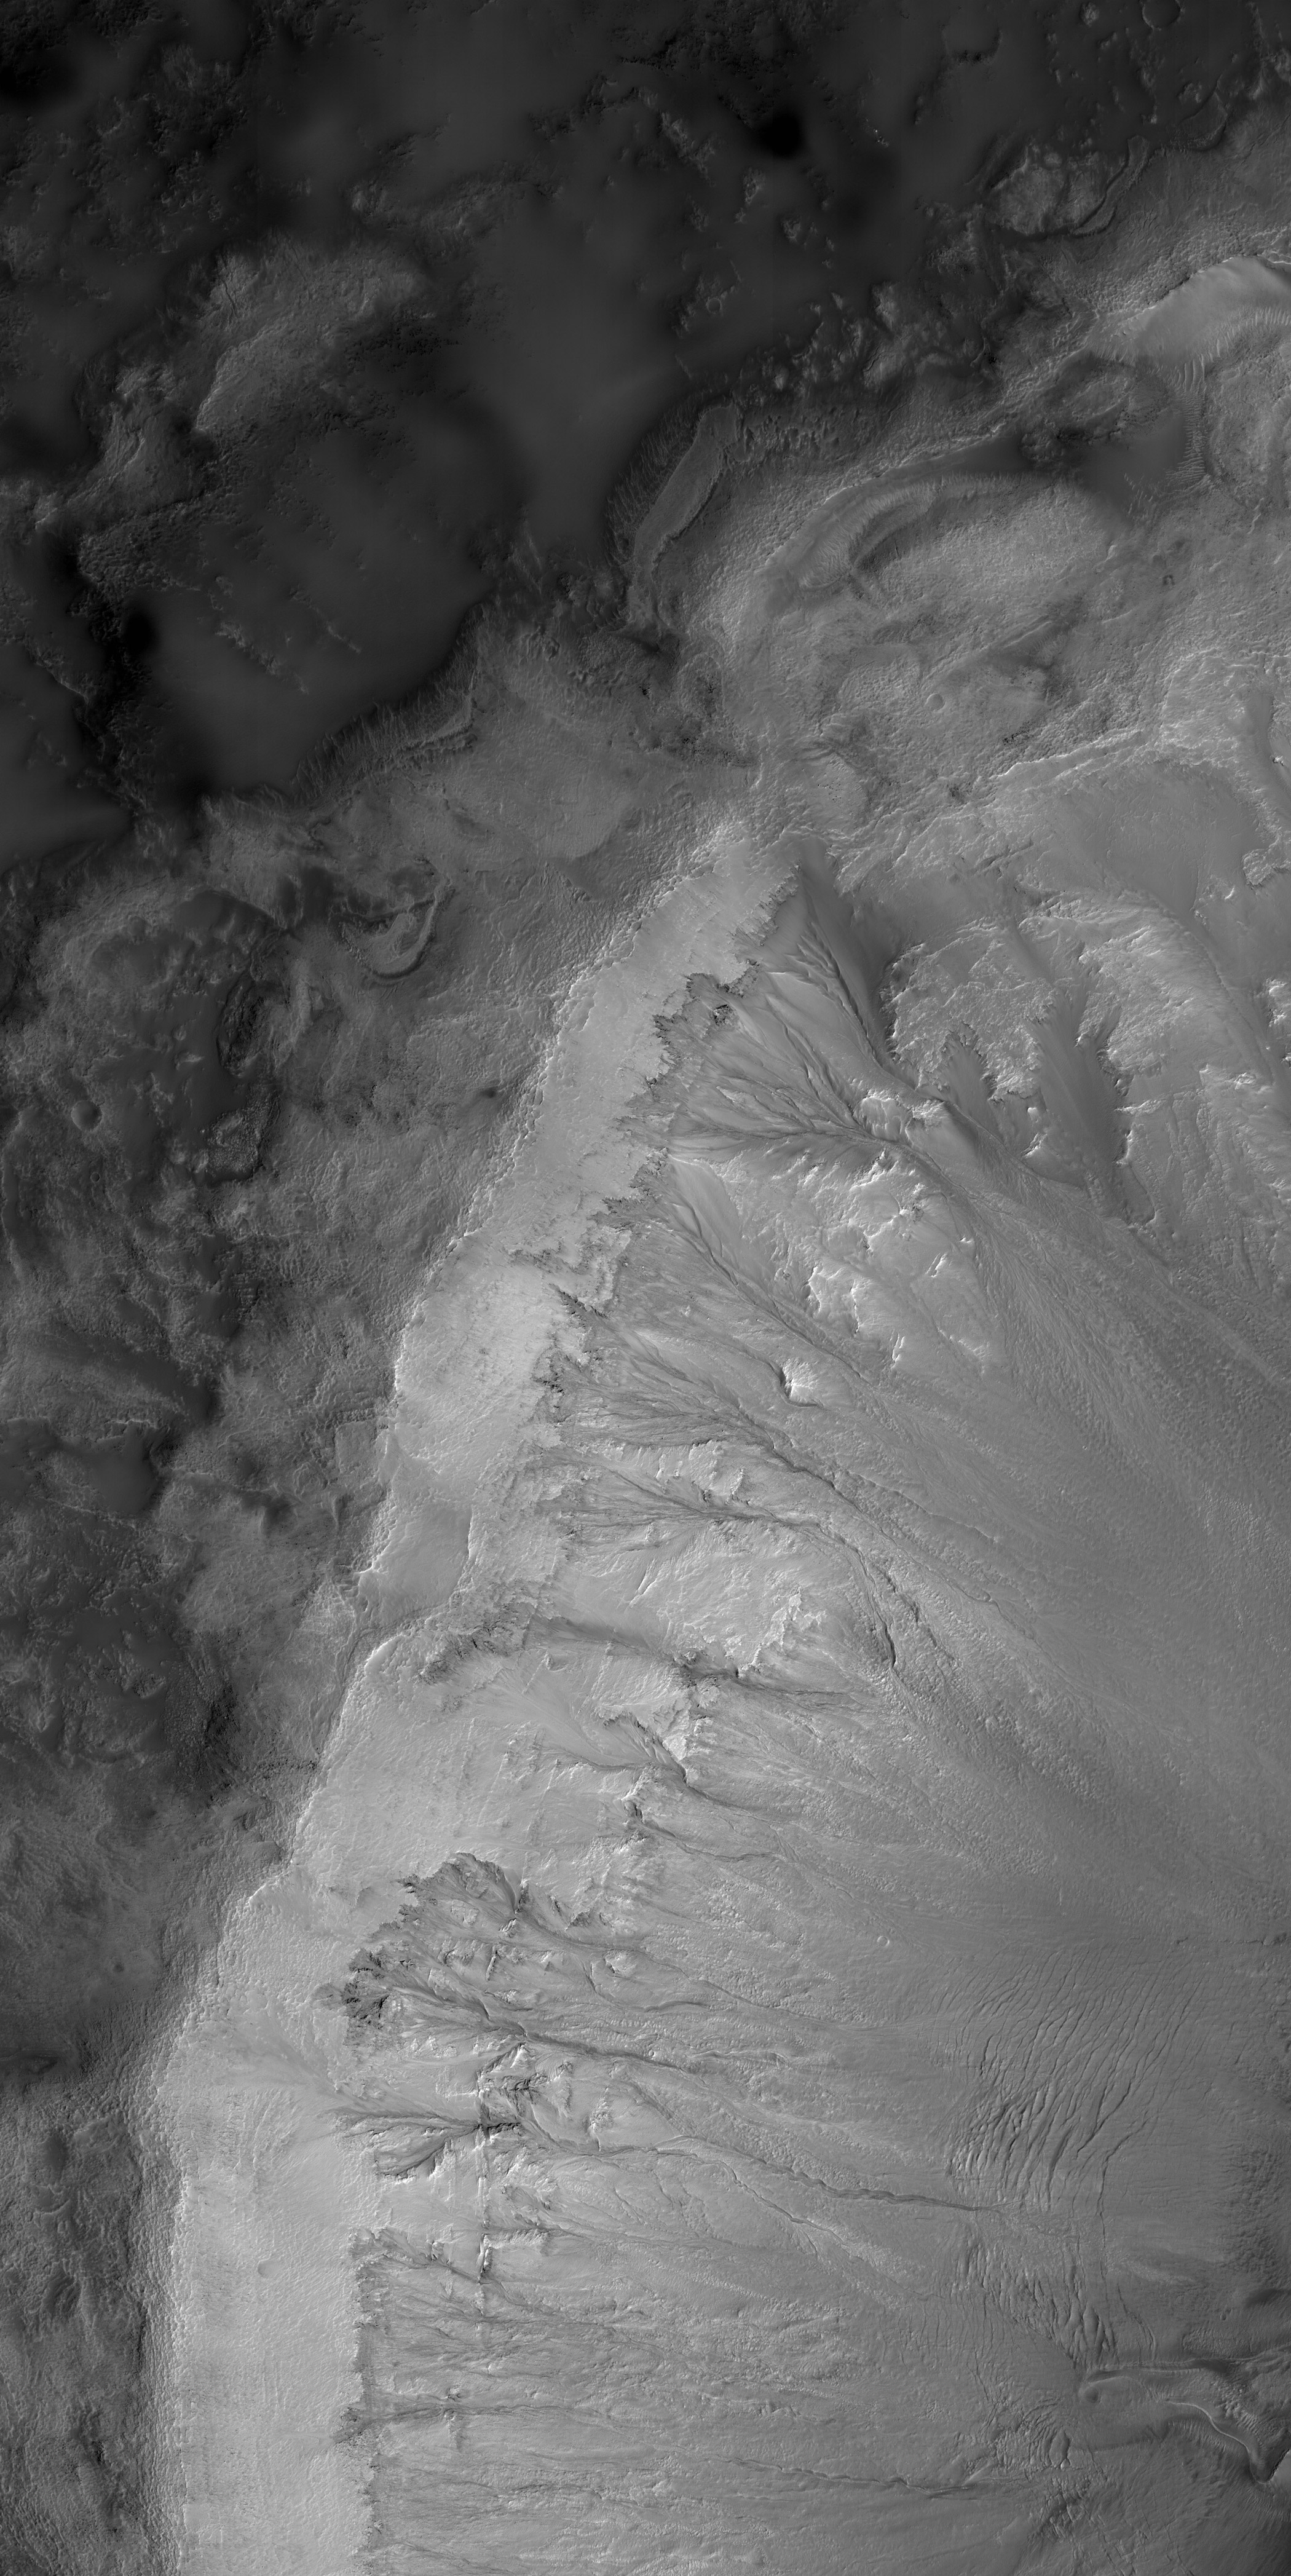 Slope features seen on a wall in Newton crater acquired on May 30, 2011.